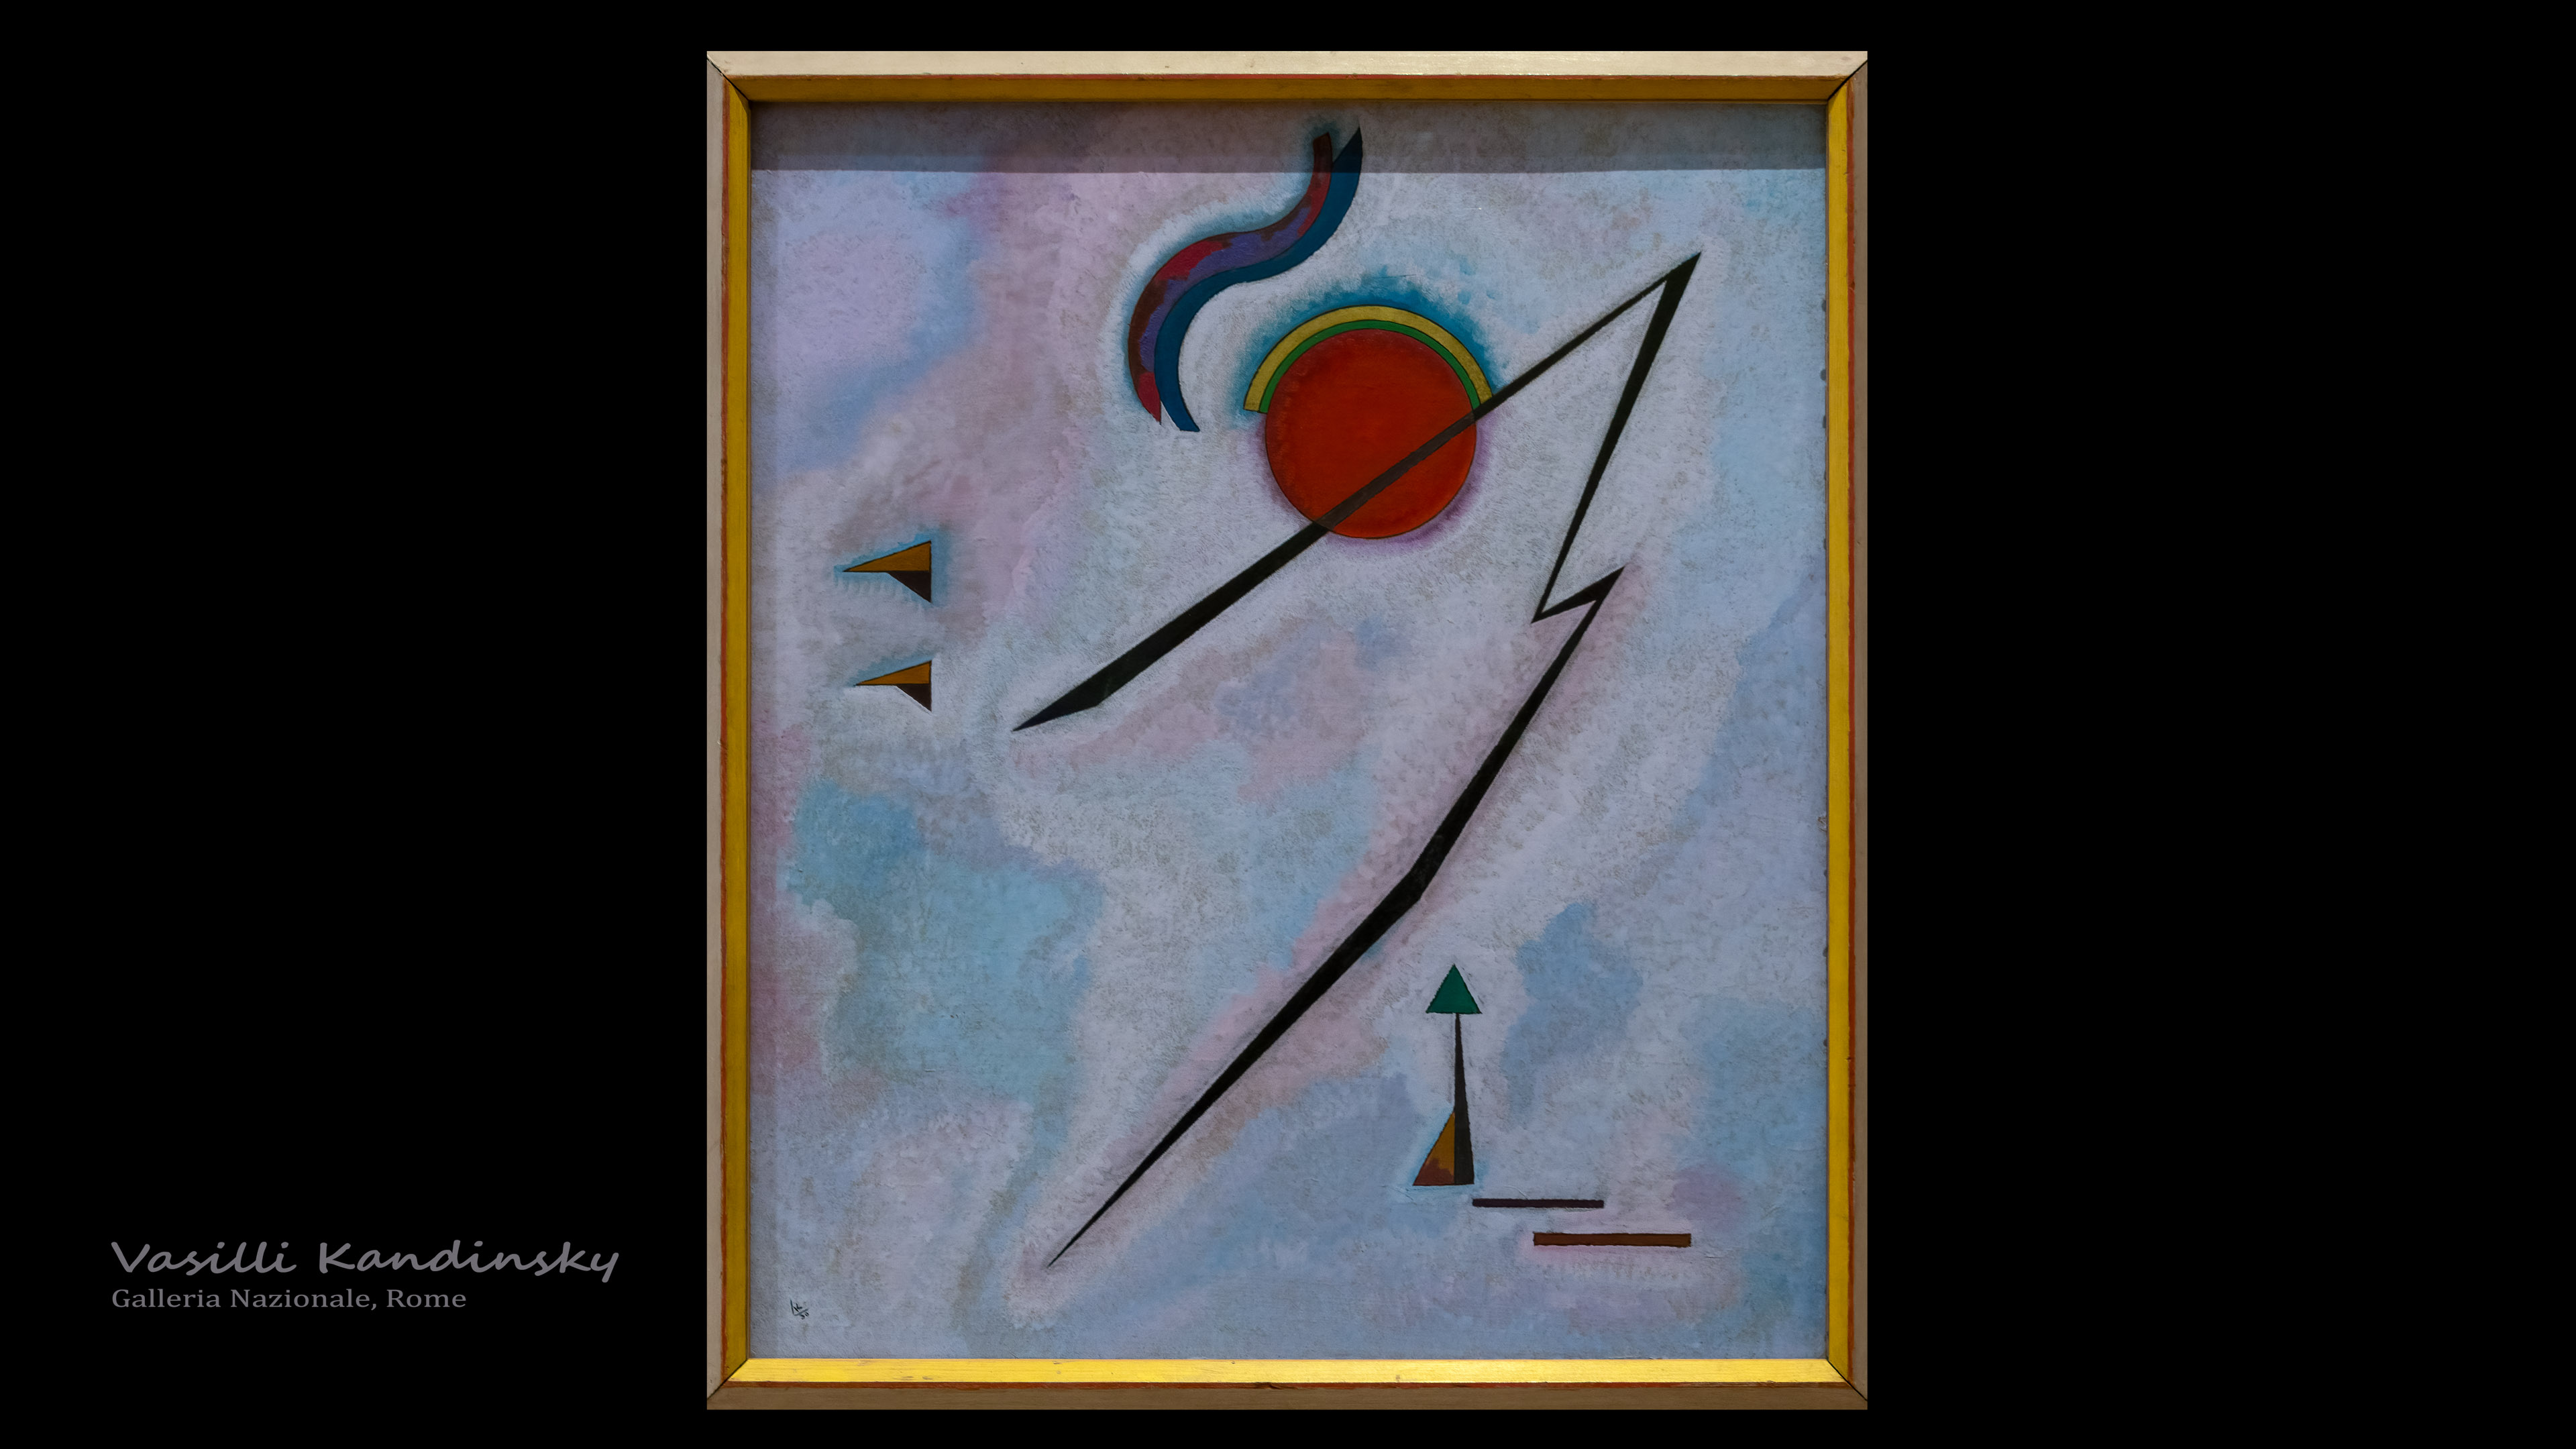 Explore the abstract world of colors and shapes with our Kandinsky 4K painting wallpaper from La Galleria Nazionale, Rome.